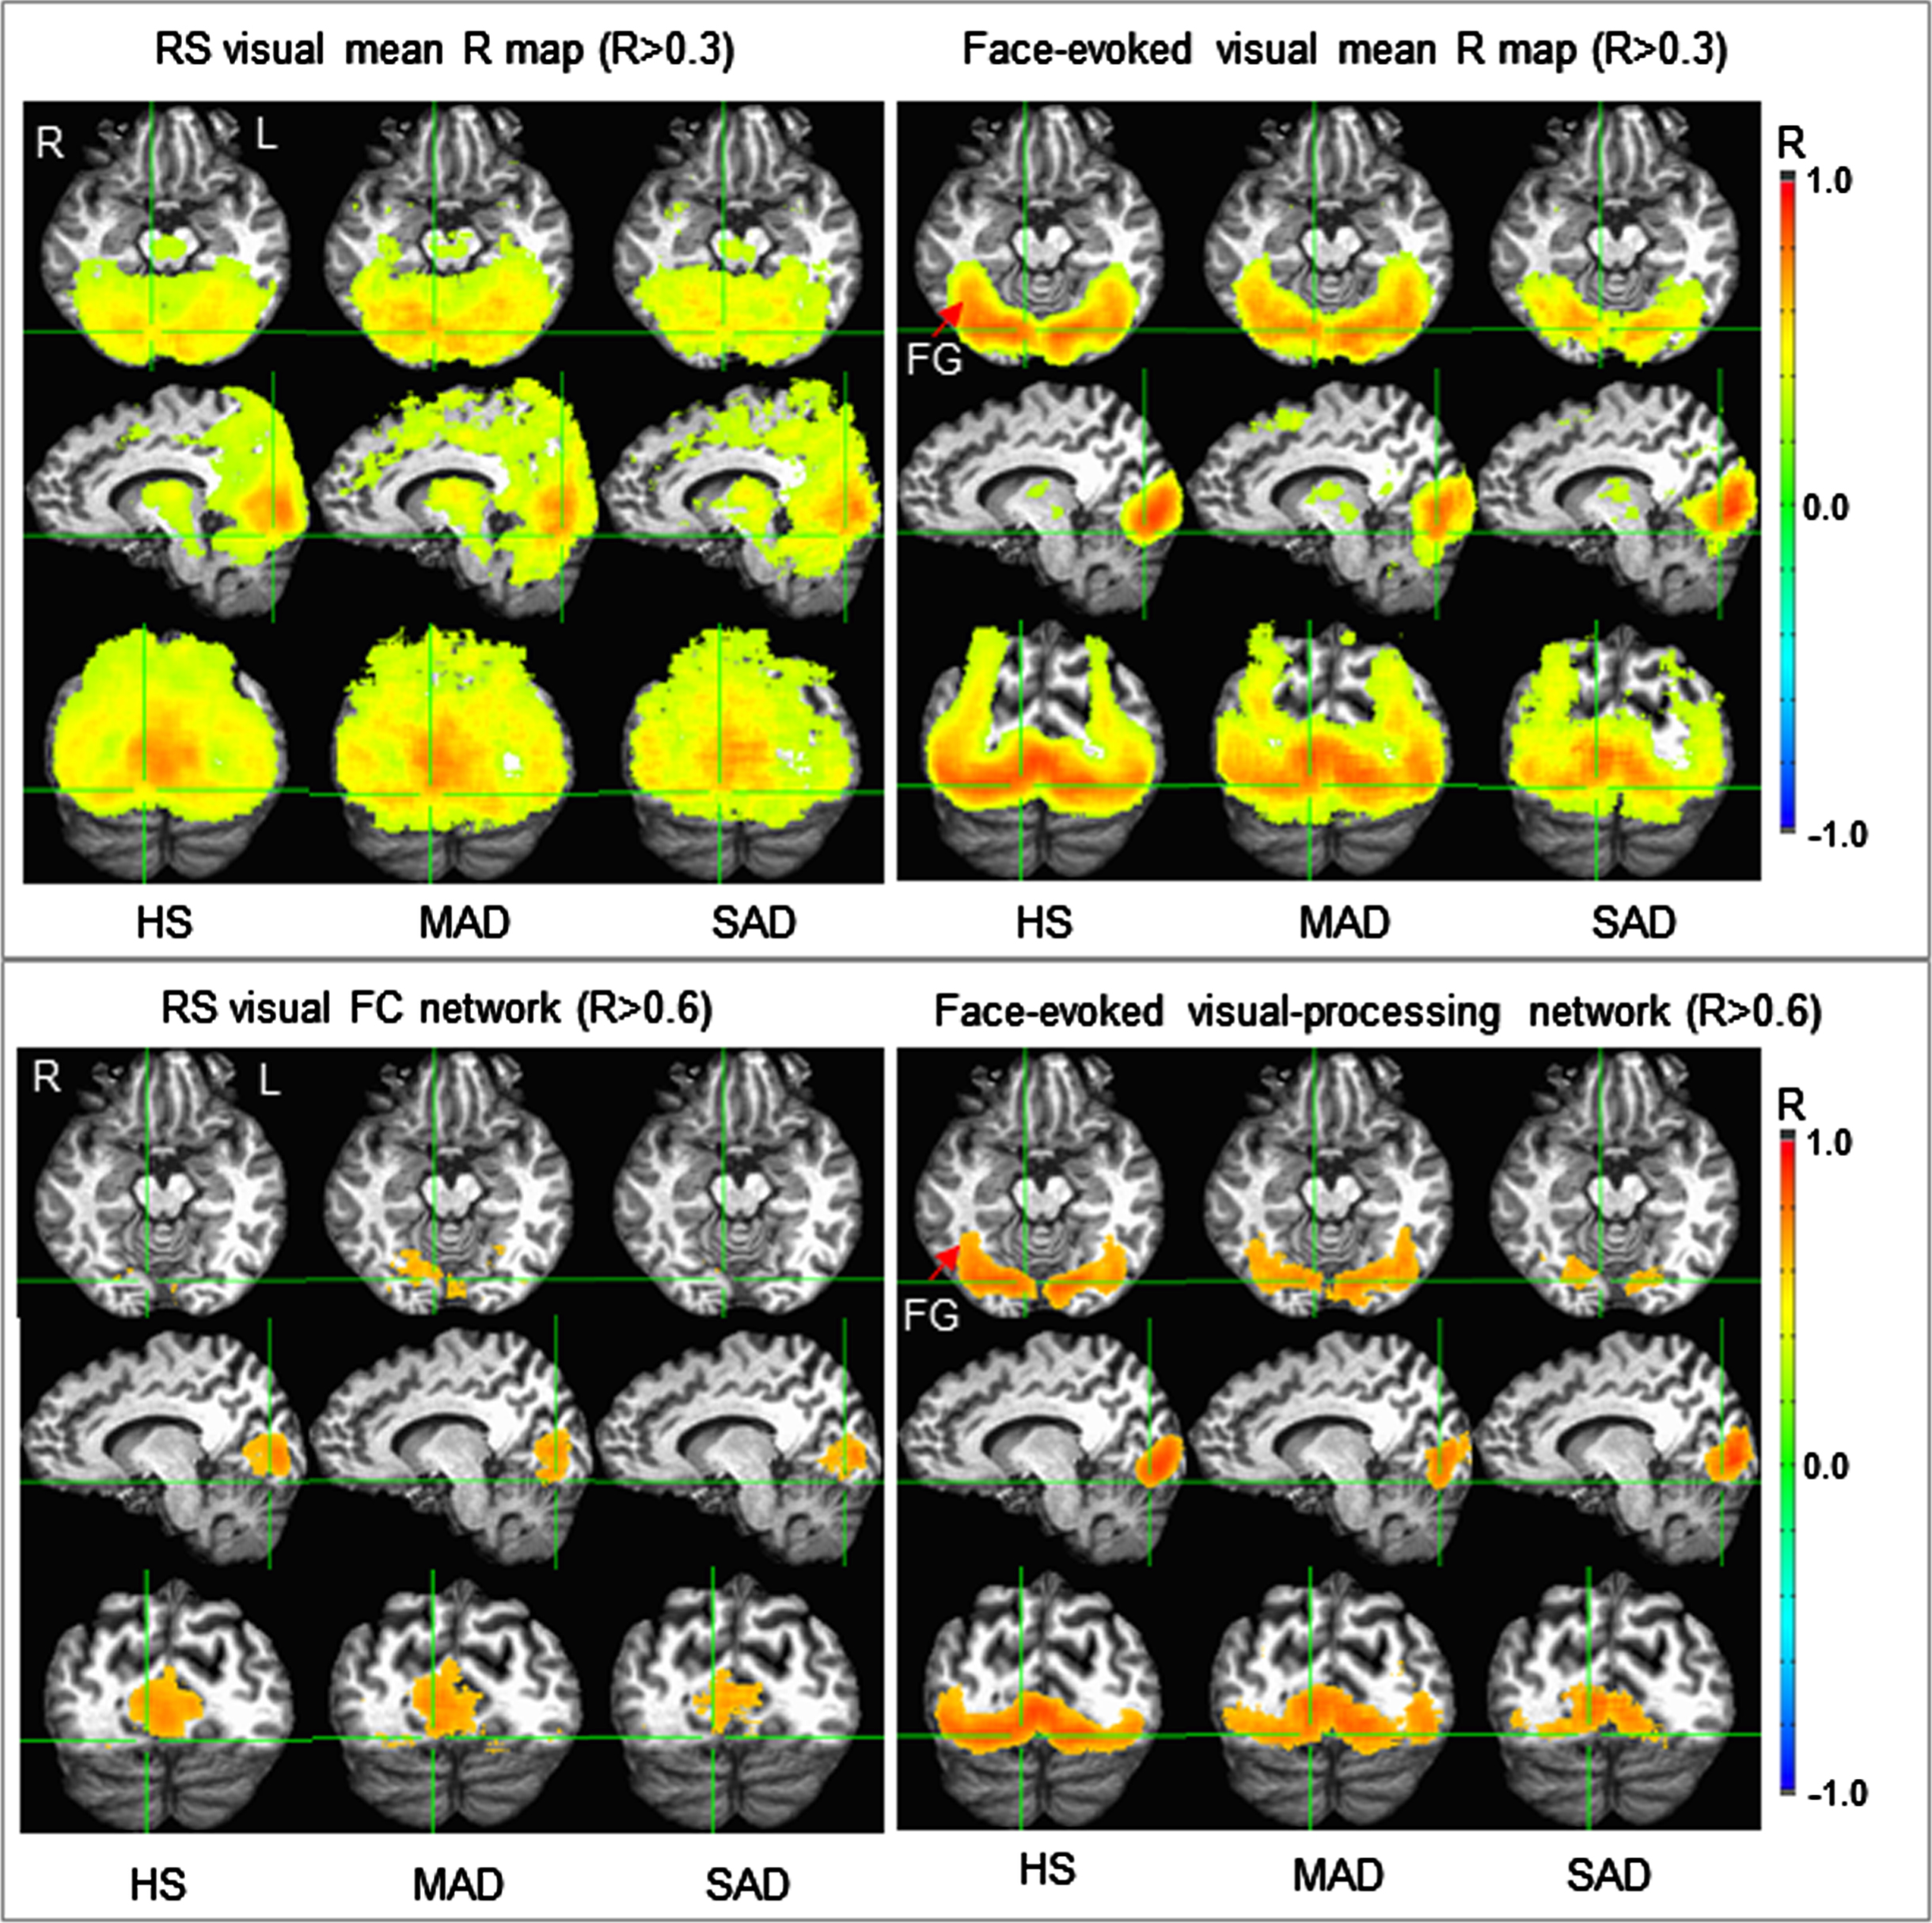 Illustration of the two visual group-mean R maps identified for the three subject groups (top panel) and their corresponding functional networks (bottom panel). (Note that these R maps were thresholded with R >  0.3 for better visual comparison between the resting and task states.) The face-evoked visual-processing network was mainly confined within the visual cortex for the severe AD (SAD), but extended to the fusiform gyrus (FG) for the healthy senior (HS) controls and mild/moderate AD (MAD). In contrast, the resting-state visual functional connectivity (FC) network was located mainly within and around area V1 for the SAD patients, but substantially extended for the MAD patients and HS controls.